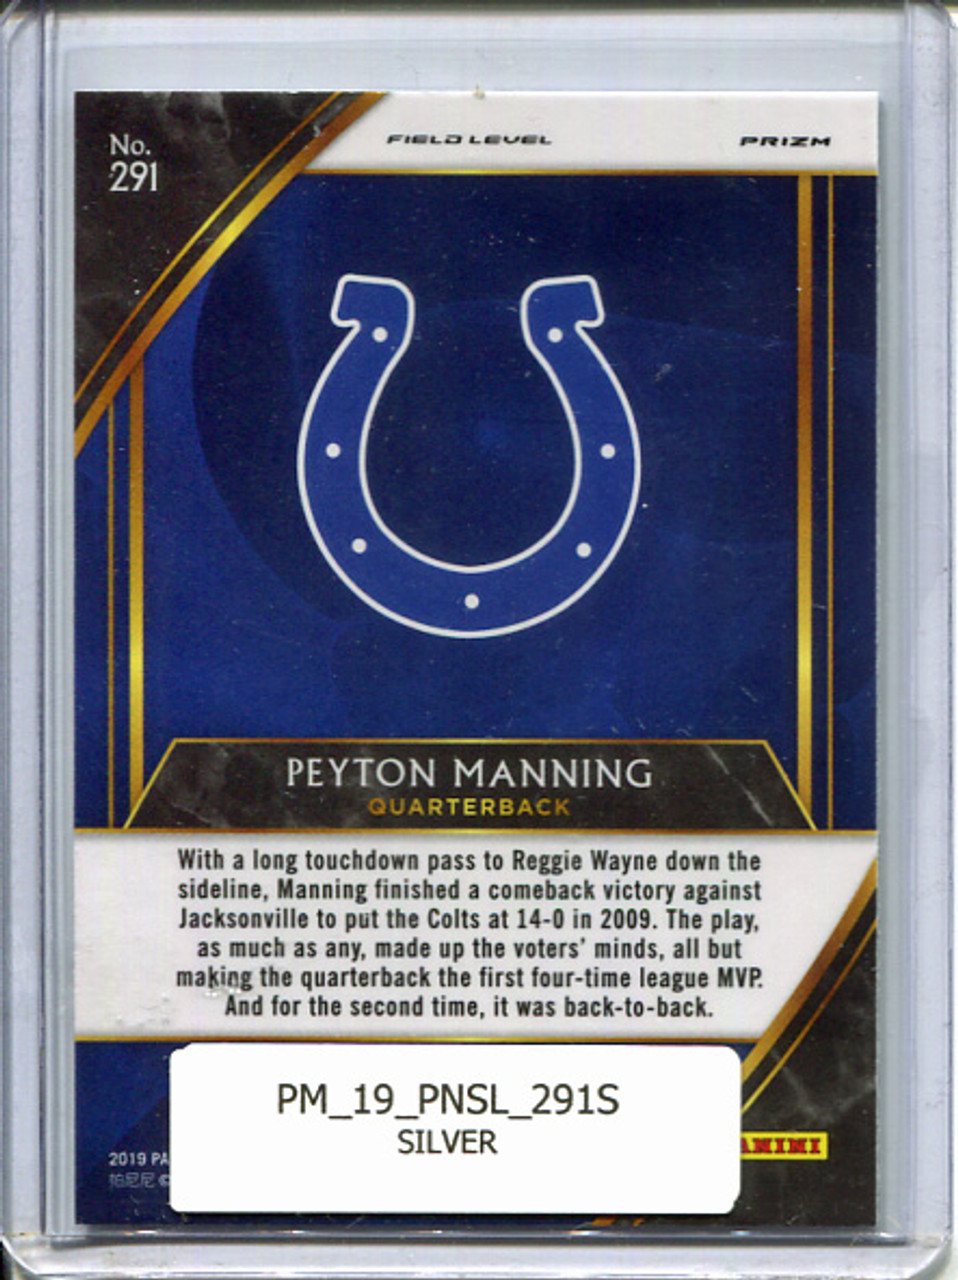 Peyton Manning 2019 Select #291 Field Level Silver